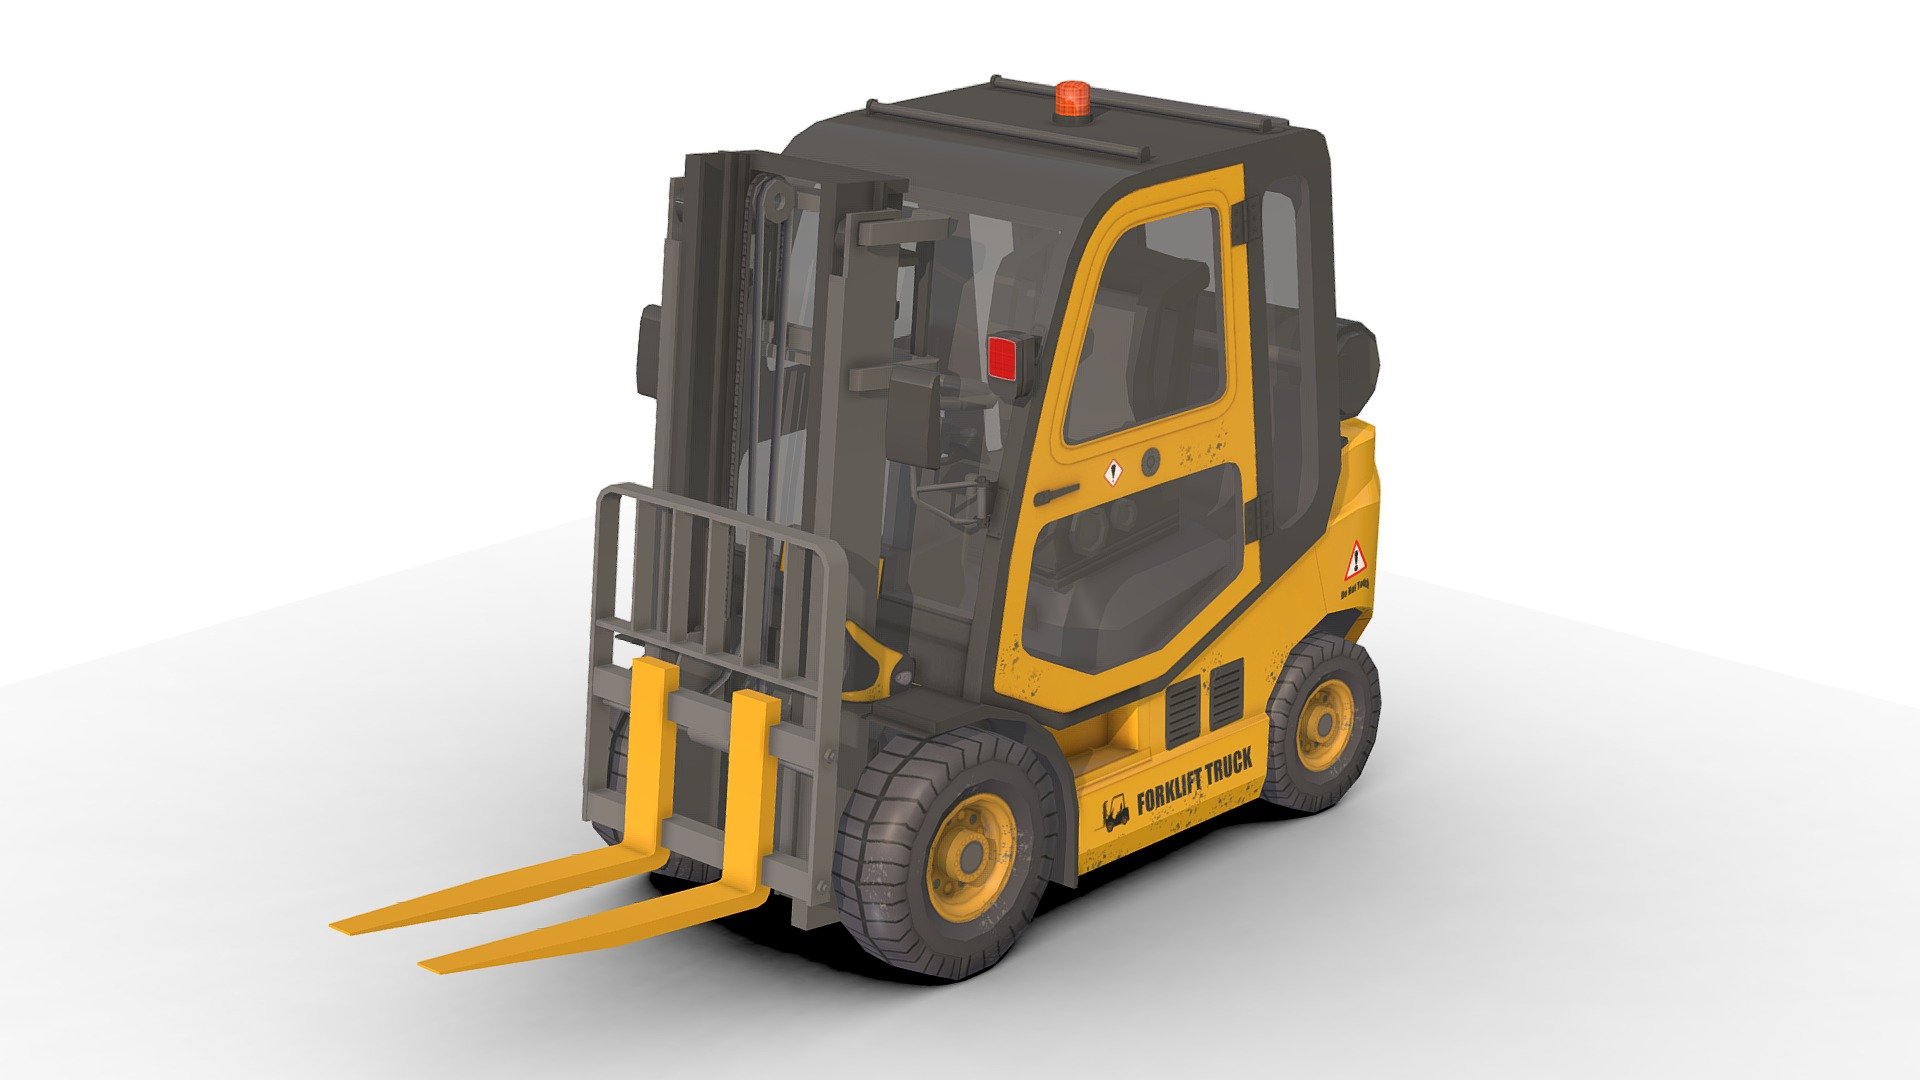 Forklift Truck Low_Poly .

You can use these models in any game and project.

This model is made with order and precision.

Separated parts (bodys . wheels . Steer . Forks ).

Very Low- Poly.

Truck have separate parts.

Average poly count: 10,000 tris.

Texture size: 2048 / 1024 (PNG).

Number of textures: 2.

Number of materials: 3.

Format: Fbx / Obj / 3DMax .

Wait for my new models.. Your friend (Sidra) 3d model